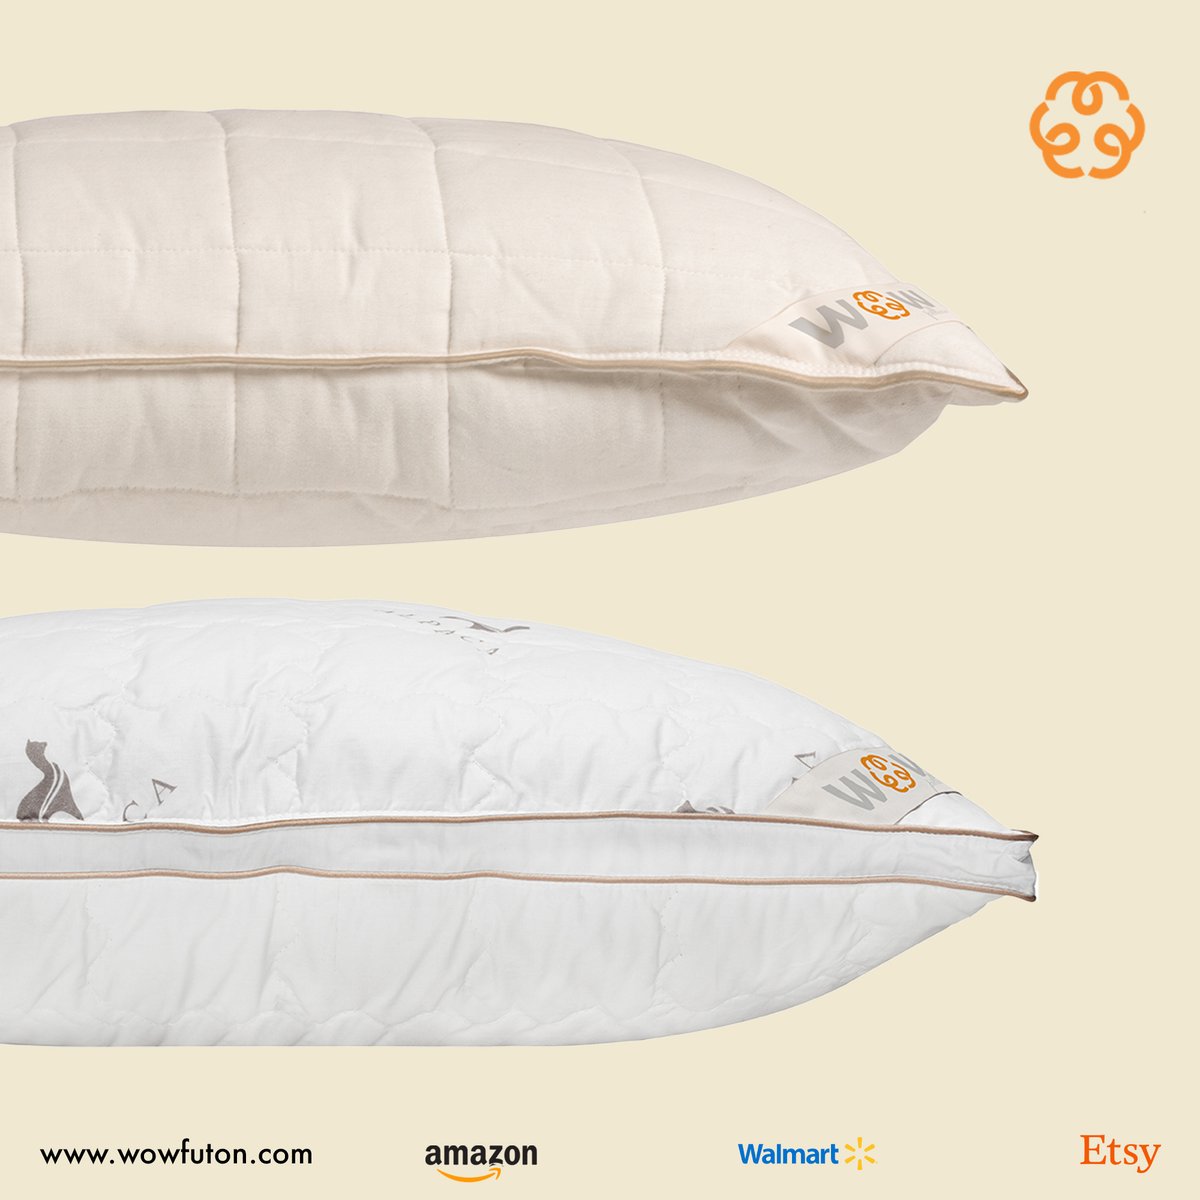 💤 Meet the energizing sleep quality of WoW Futon Merino and Alpaca Wool organic pillows. With a brand new energy every new morning.

🧡 Discover naturalness at WoWFuton.com

#wowfuton
#organicpillow
#merinowool
#alpacawool
#organicbedding
#sleepwell
#livewell